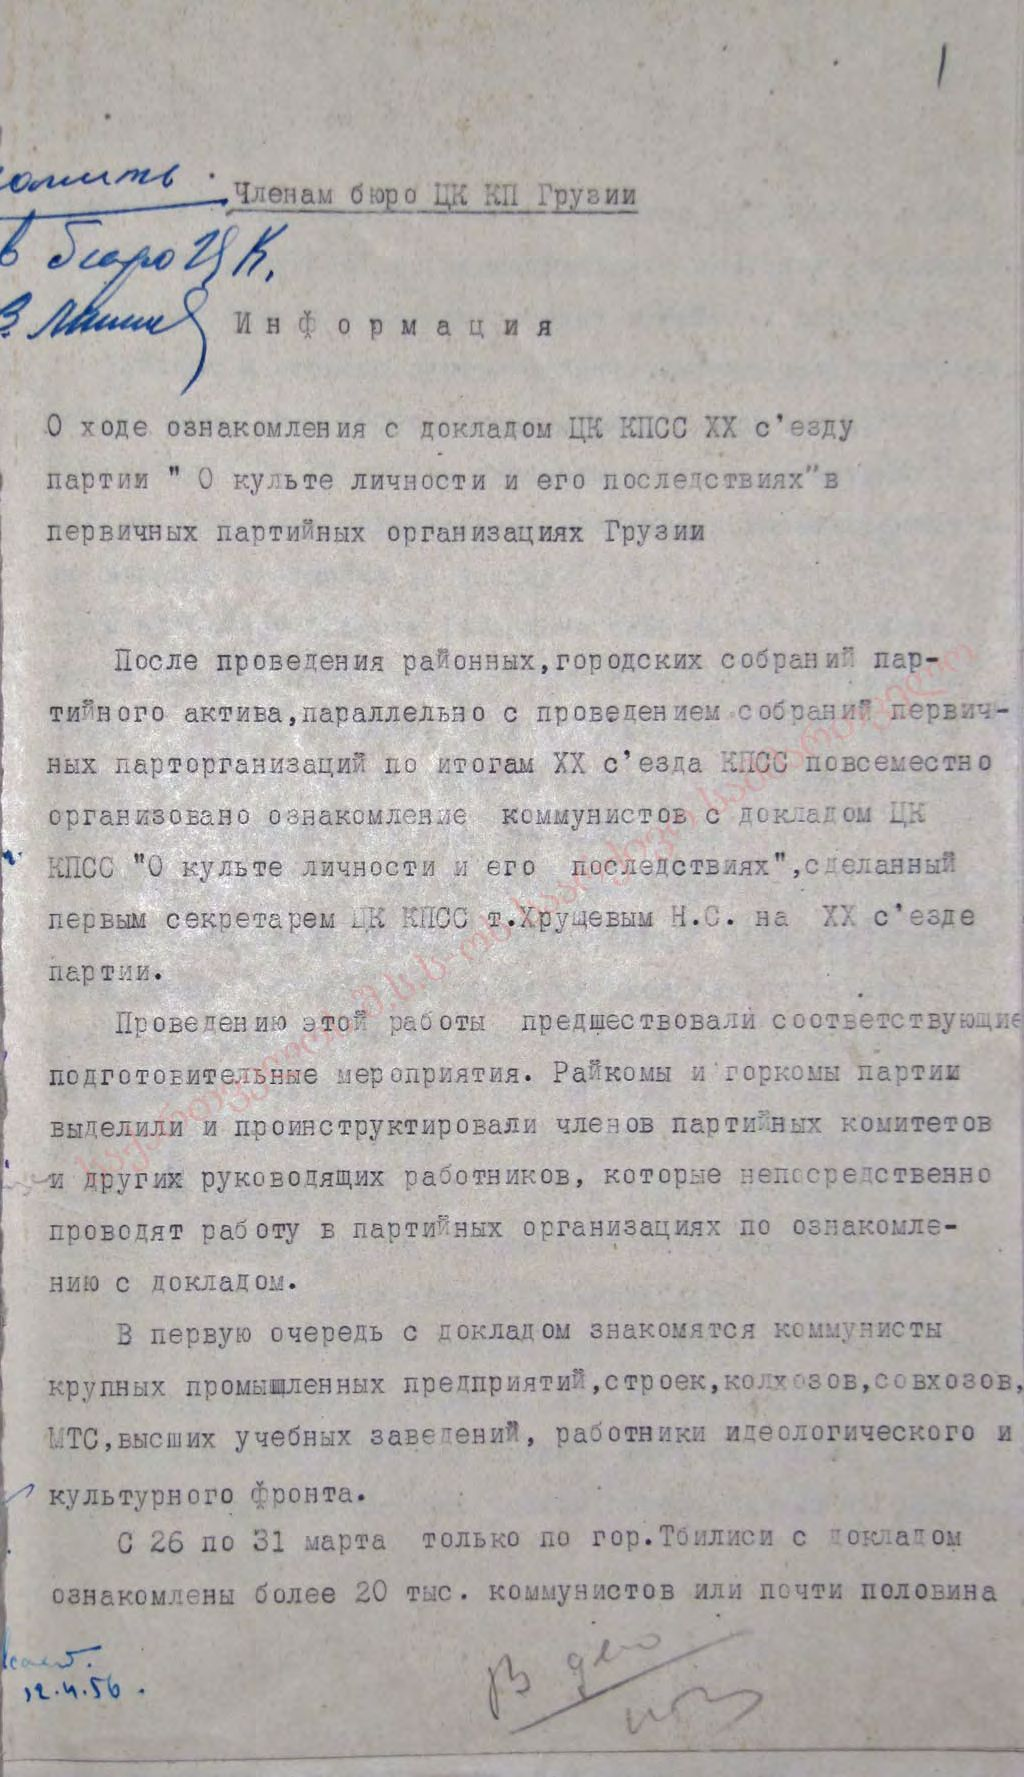 Opinions of the communist party members in various party organizations in regions of Georgia about Stalin and his role after the speech of Nikita Khrushchev at the XX Party Congress about the “On the Personality Cult and its Consequences” was read.   